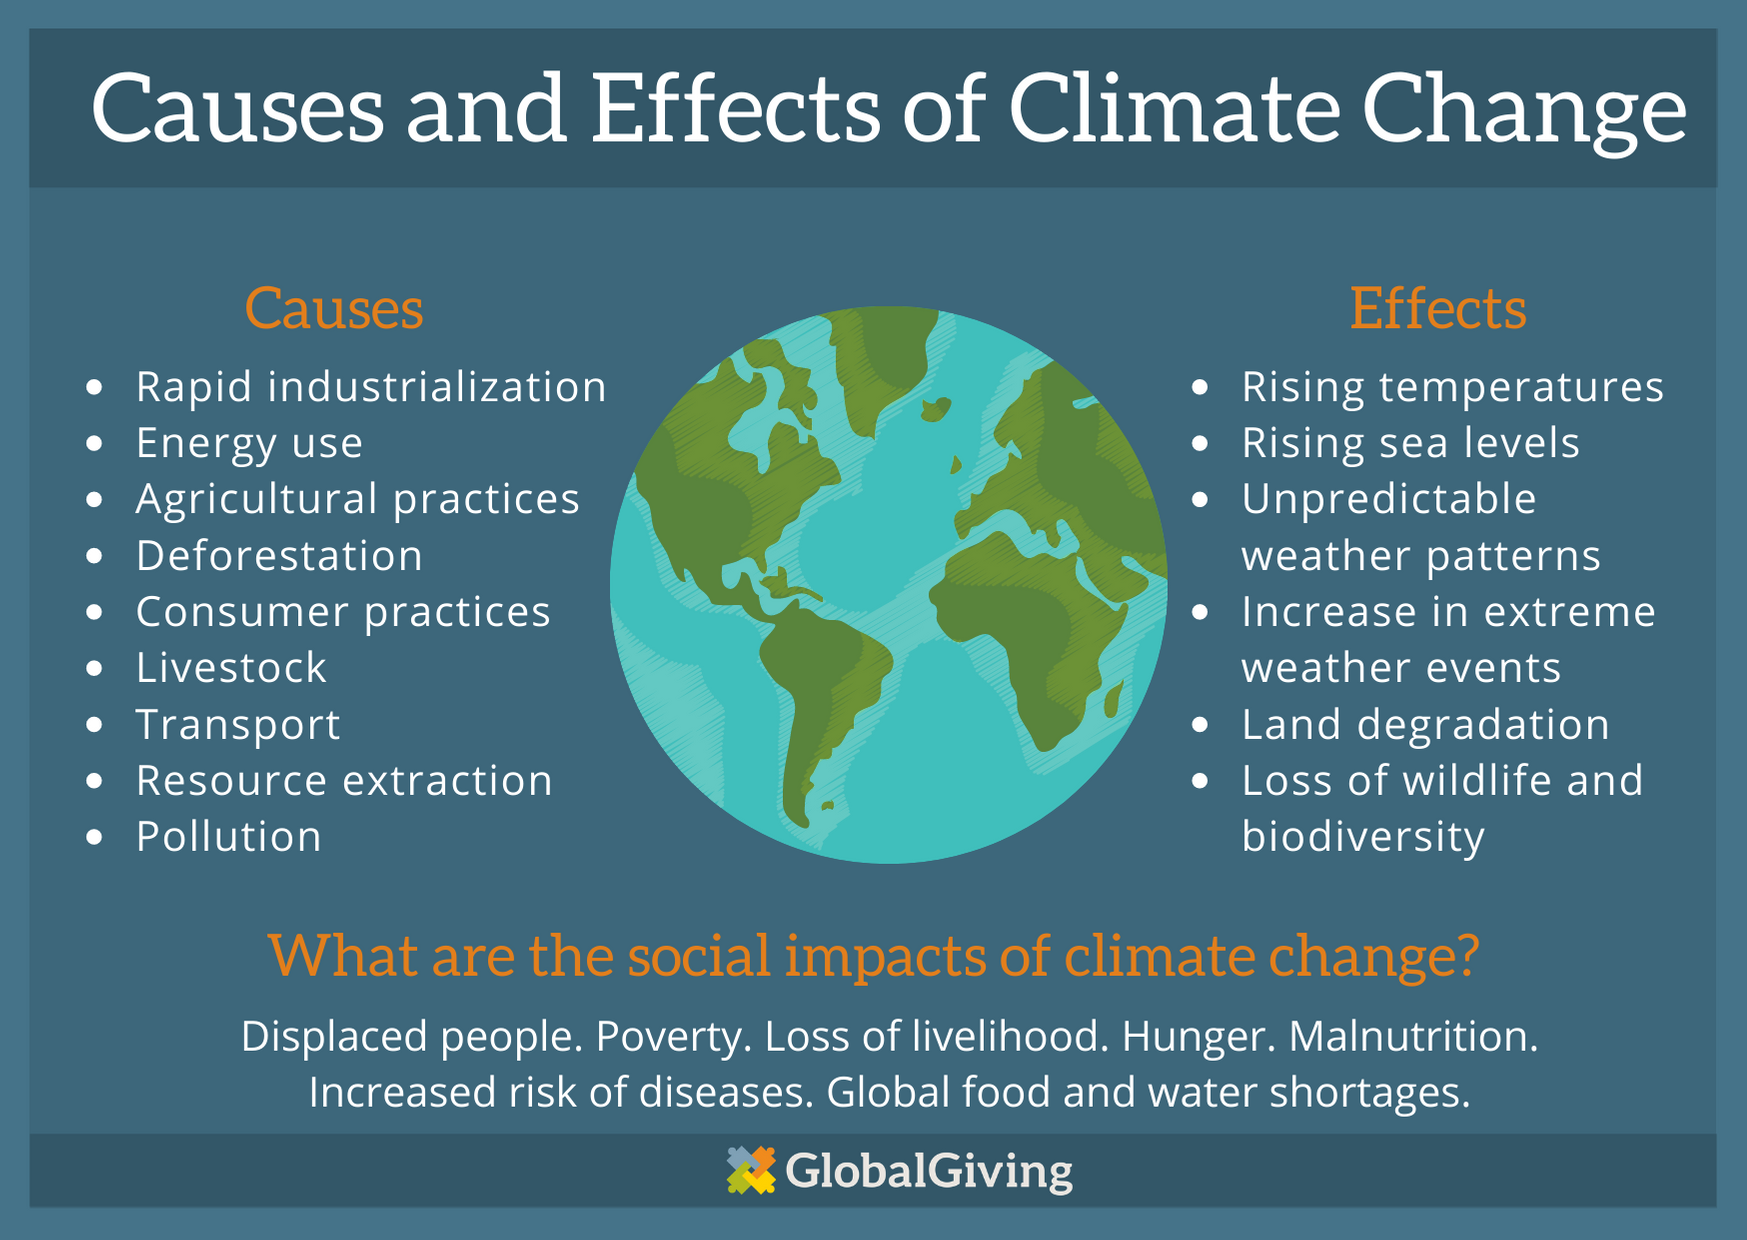 What are the 10 major effects of climate change?